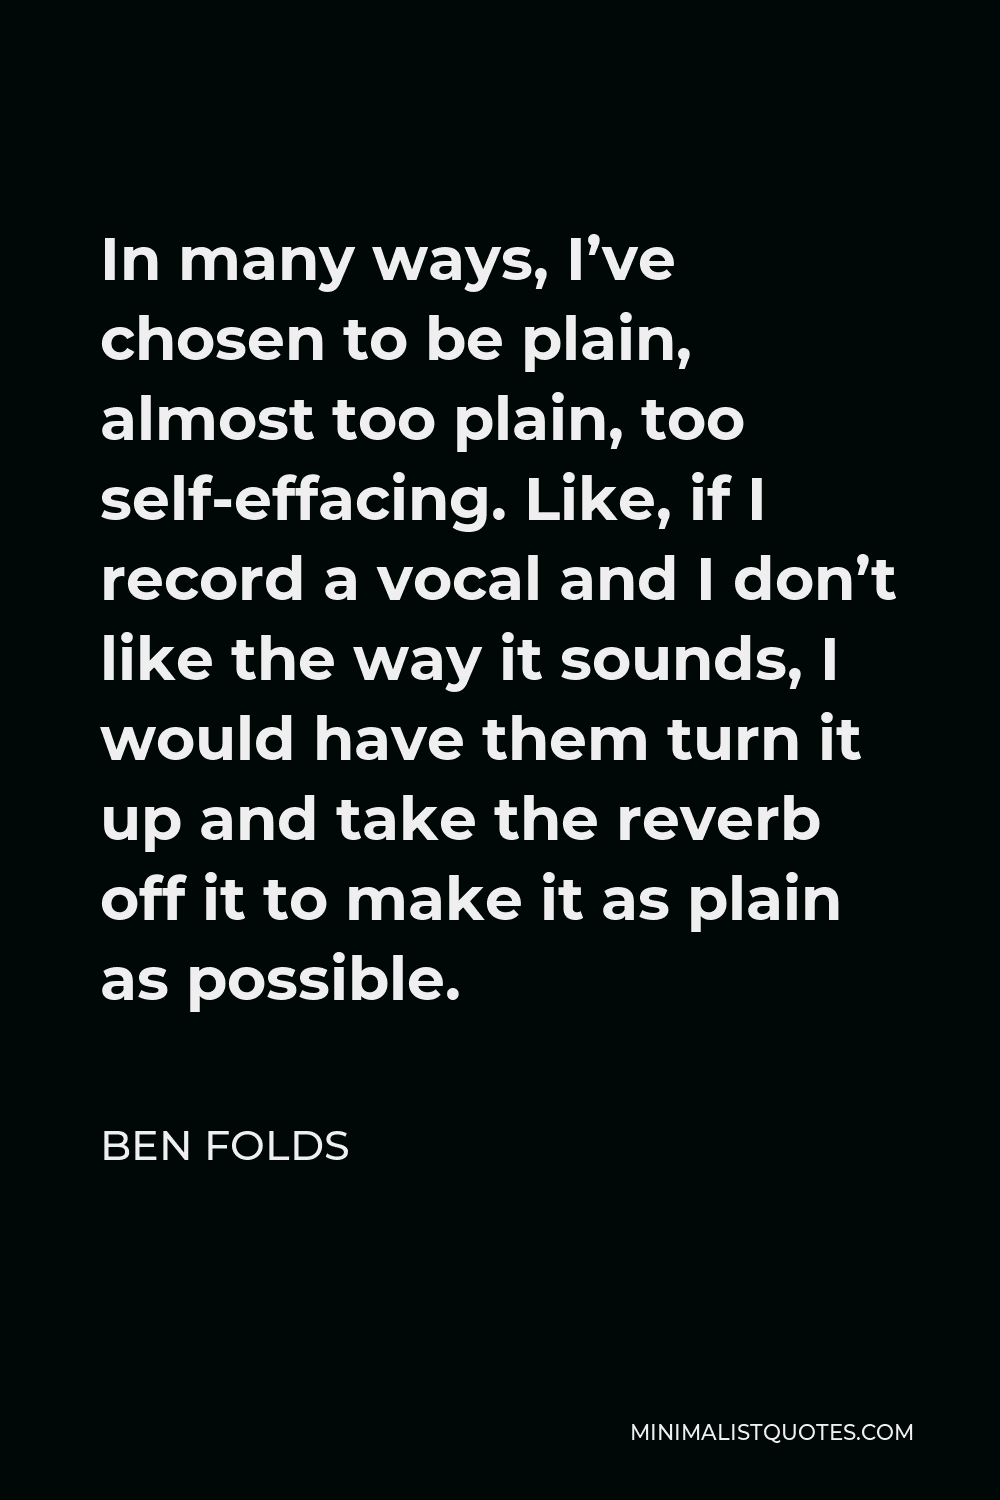 Ben Folds Quote - In many ways, I’ve chosen to be plain, almost too plain, too self-effacing. Like, if I record a vocal and I don’t like the way it sounds, I would have them turn it up and take the reverb off it to make it as plain as possible.